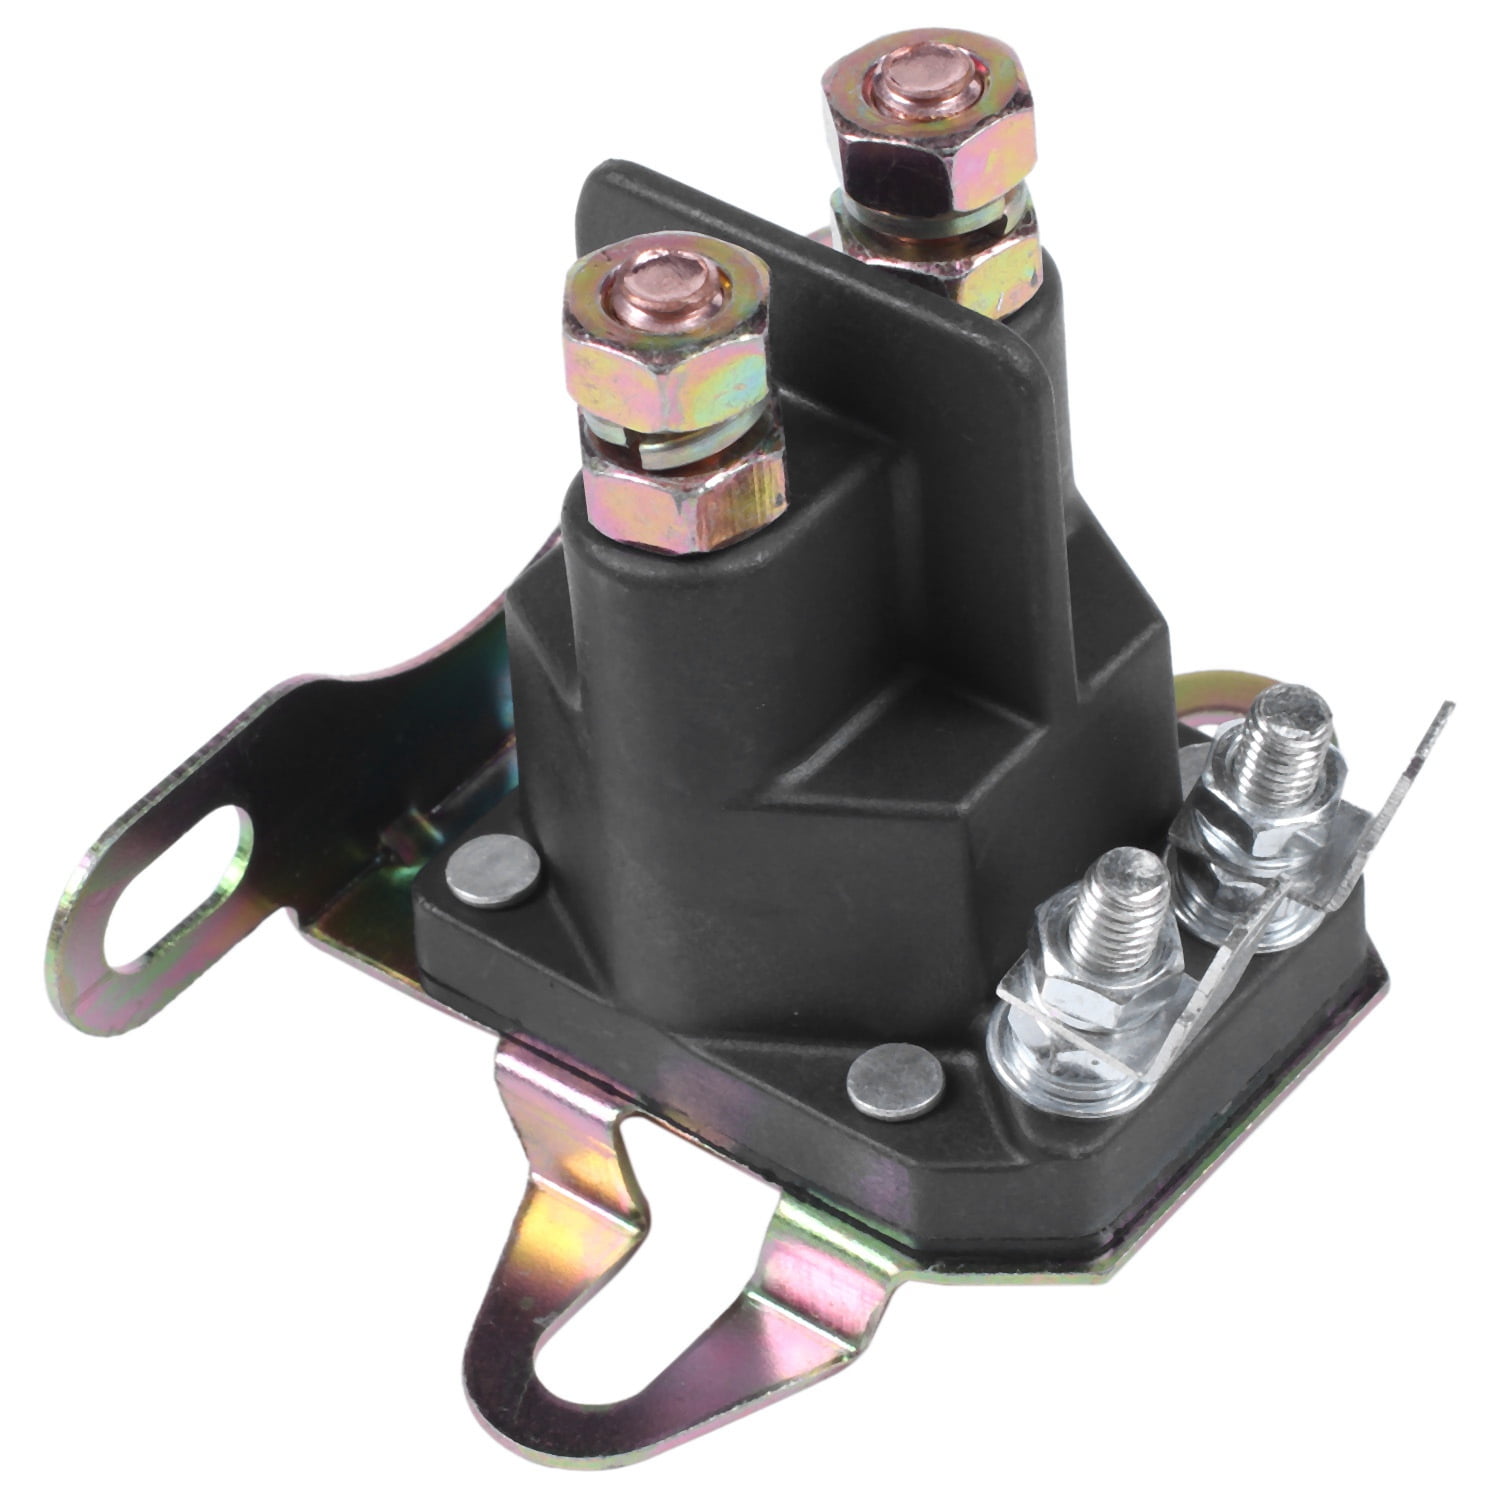 Universal 4-pole Starter Solenoid Relay for BRIGGS STRATTON Motorboat Lawn Mower 